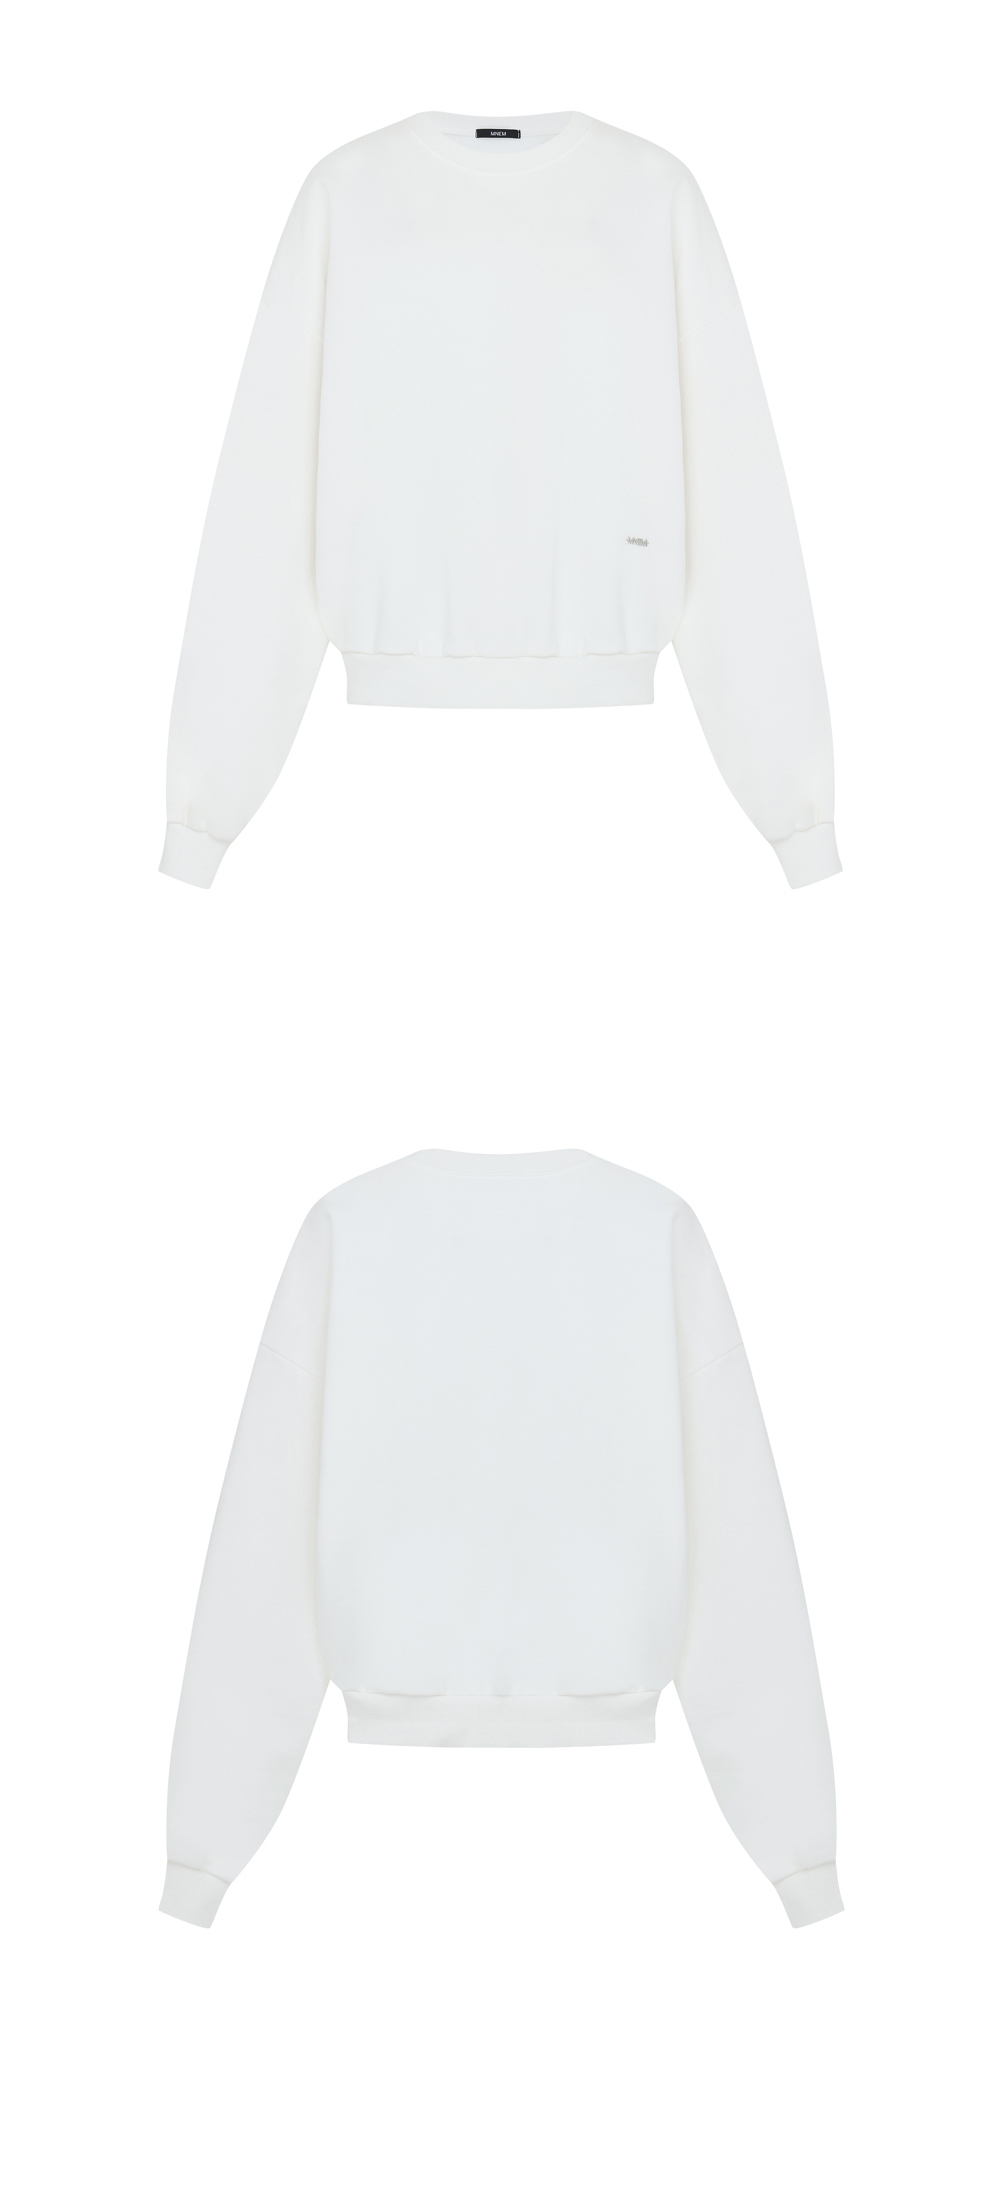 long sleeved tee white color image-S1L12